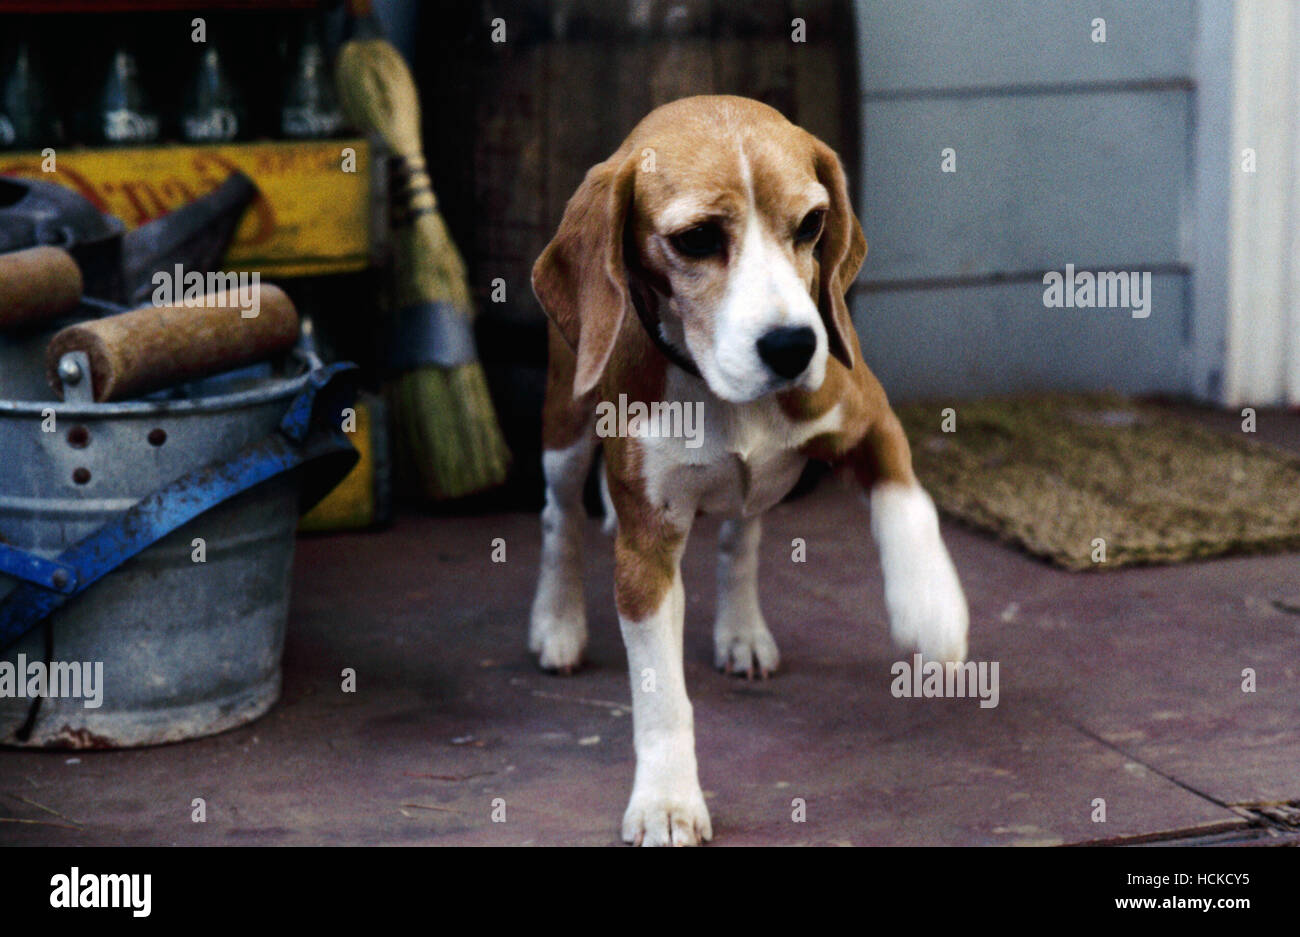 SHILOH, Shiloh the dog, 1996, © Legacy Releasing/courtesy Everett Collection Stock Photo